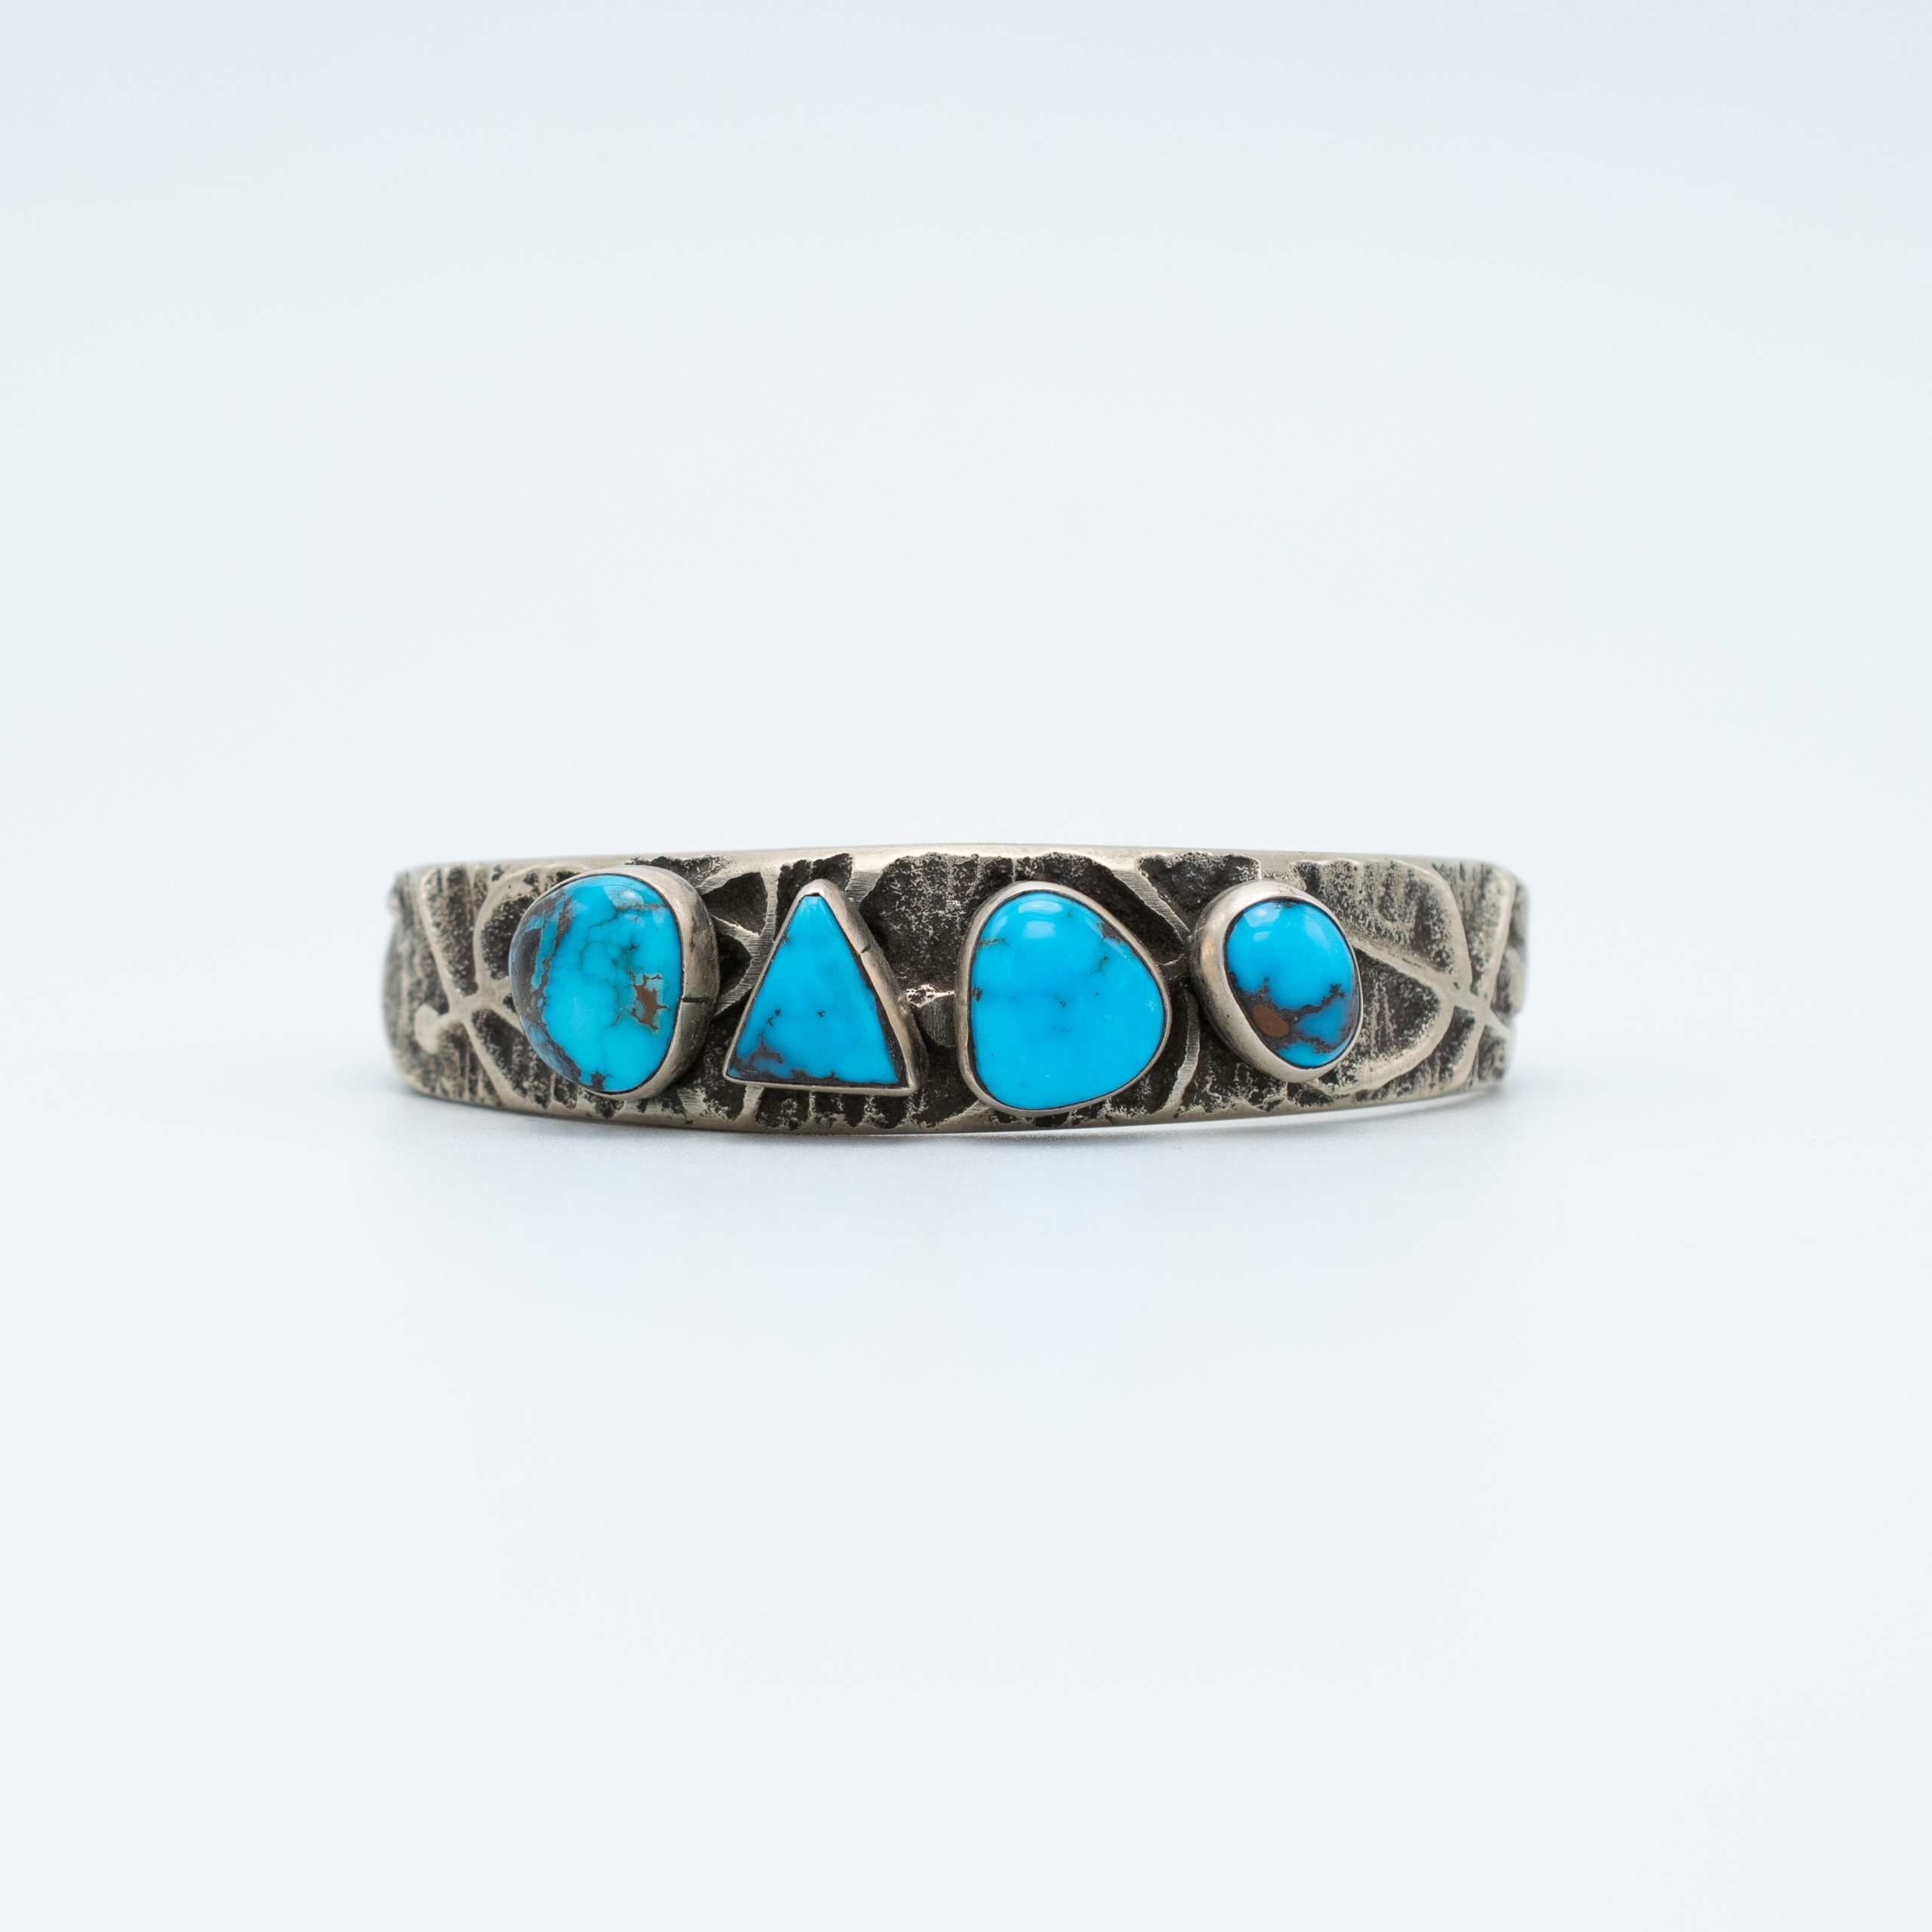 Aaron Anderson (Navajo) Tufa Cast Bracelet in Sterling Silver with Turquoise